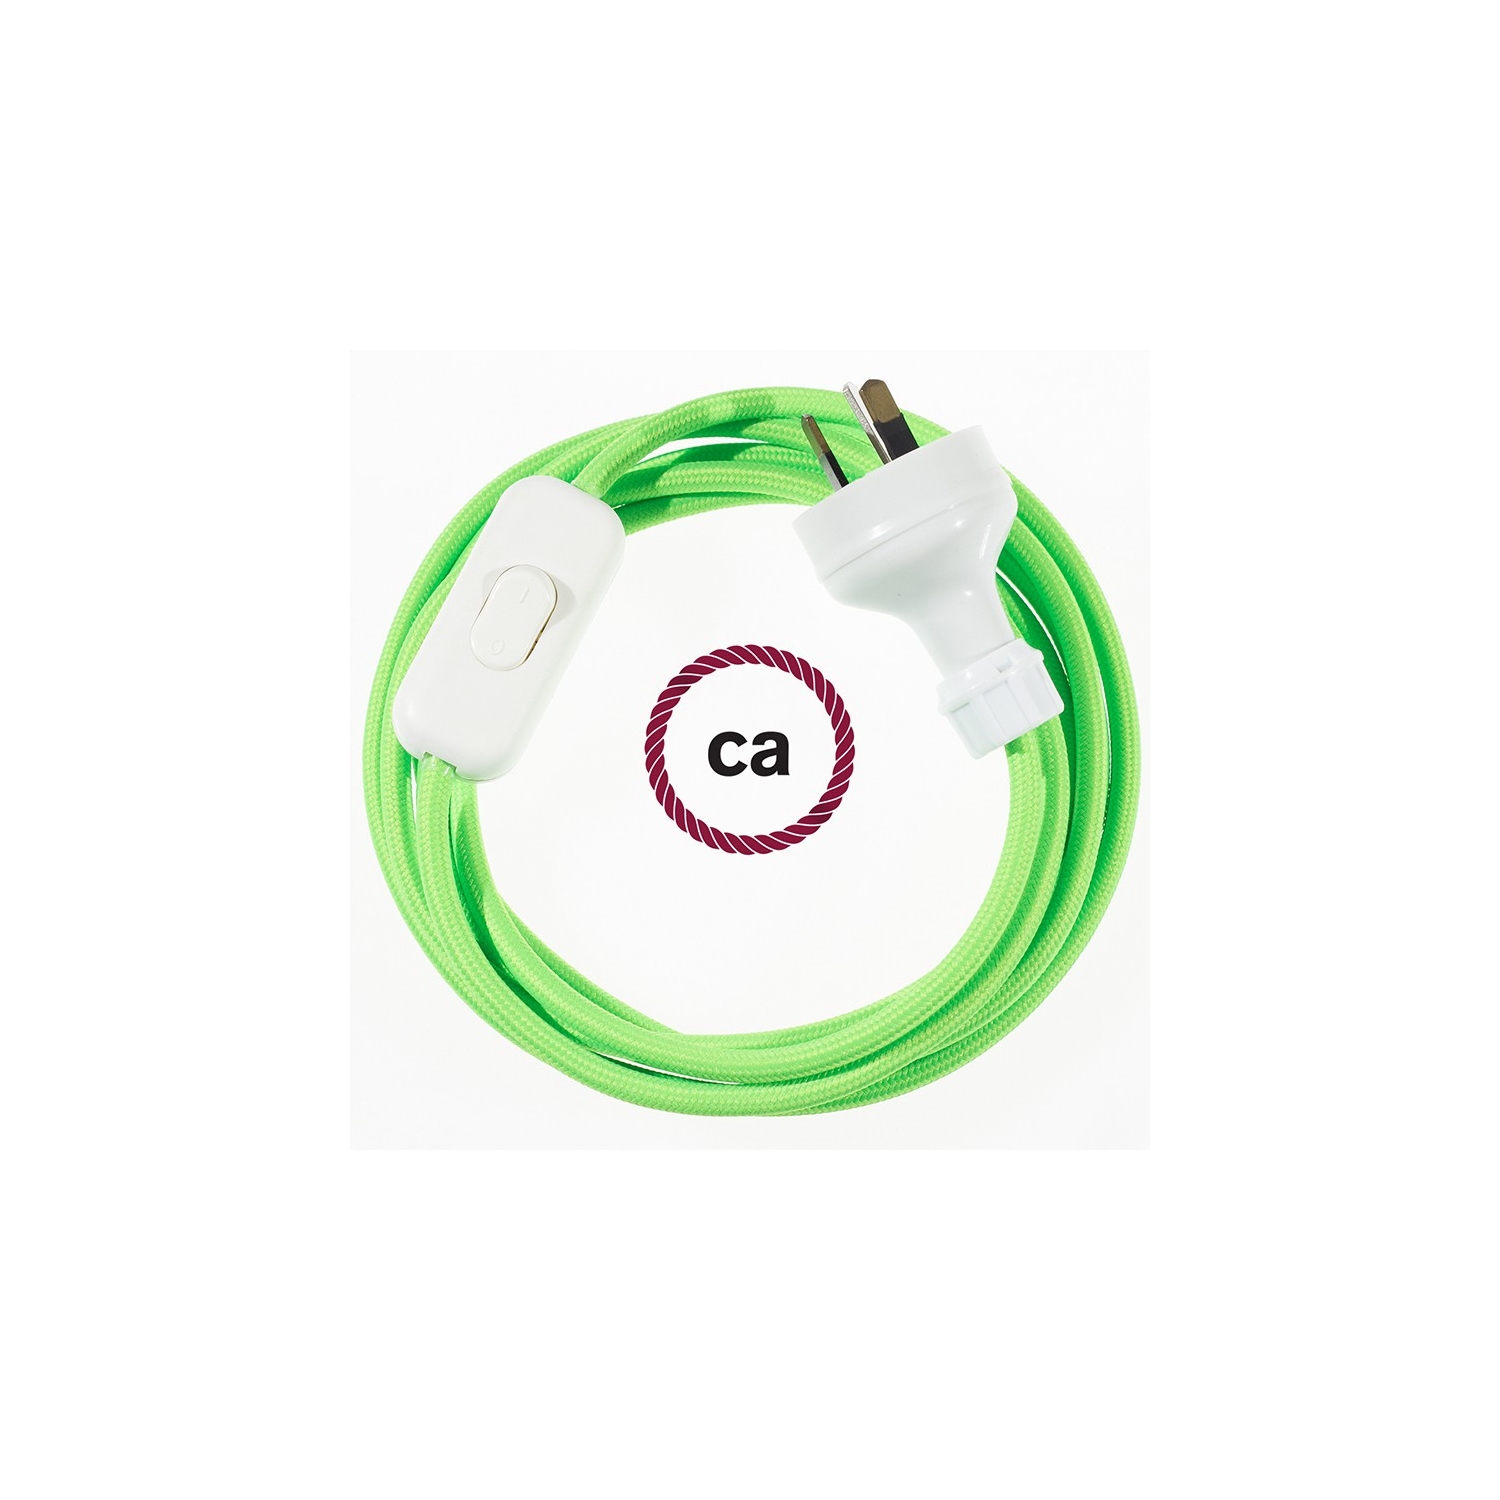 Wiring Green Fluo textile cable RF06 - 1.80 mt